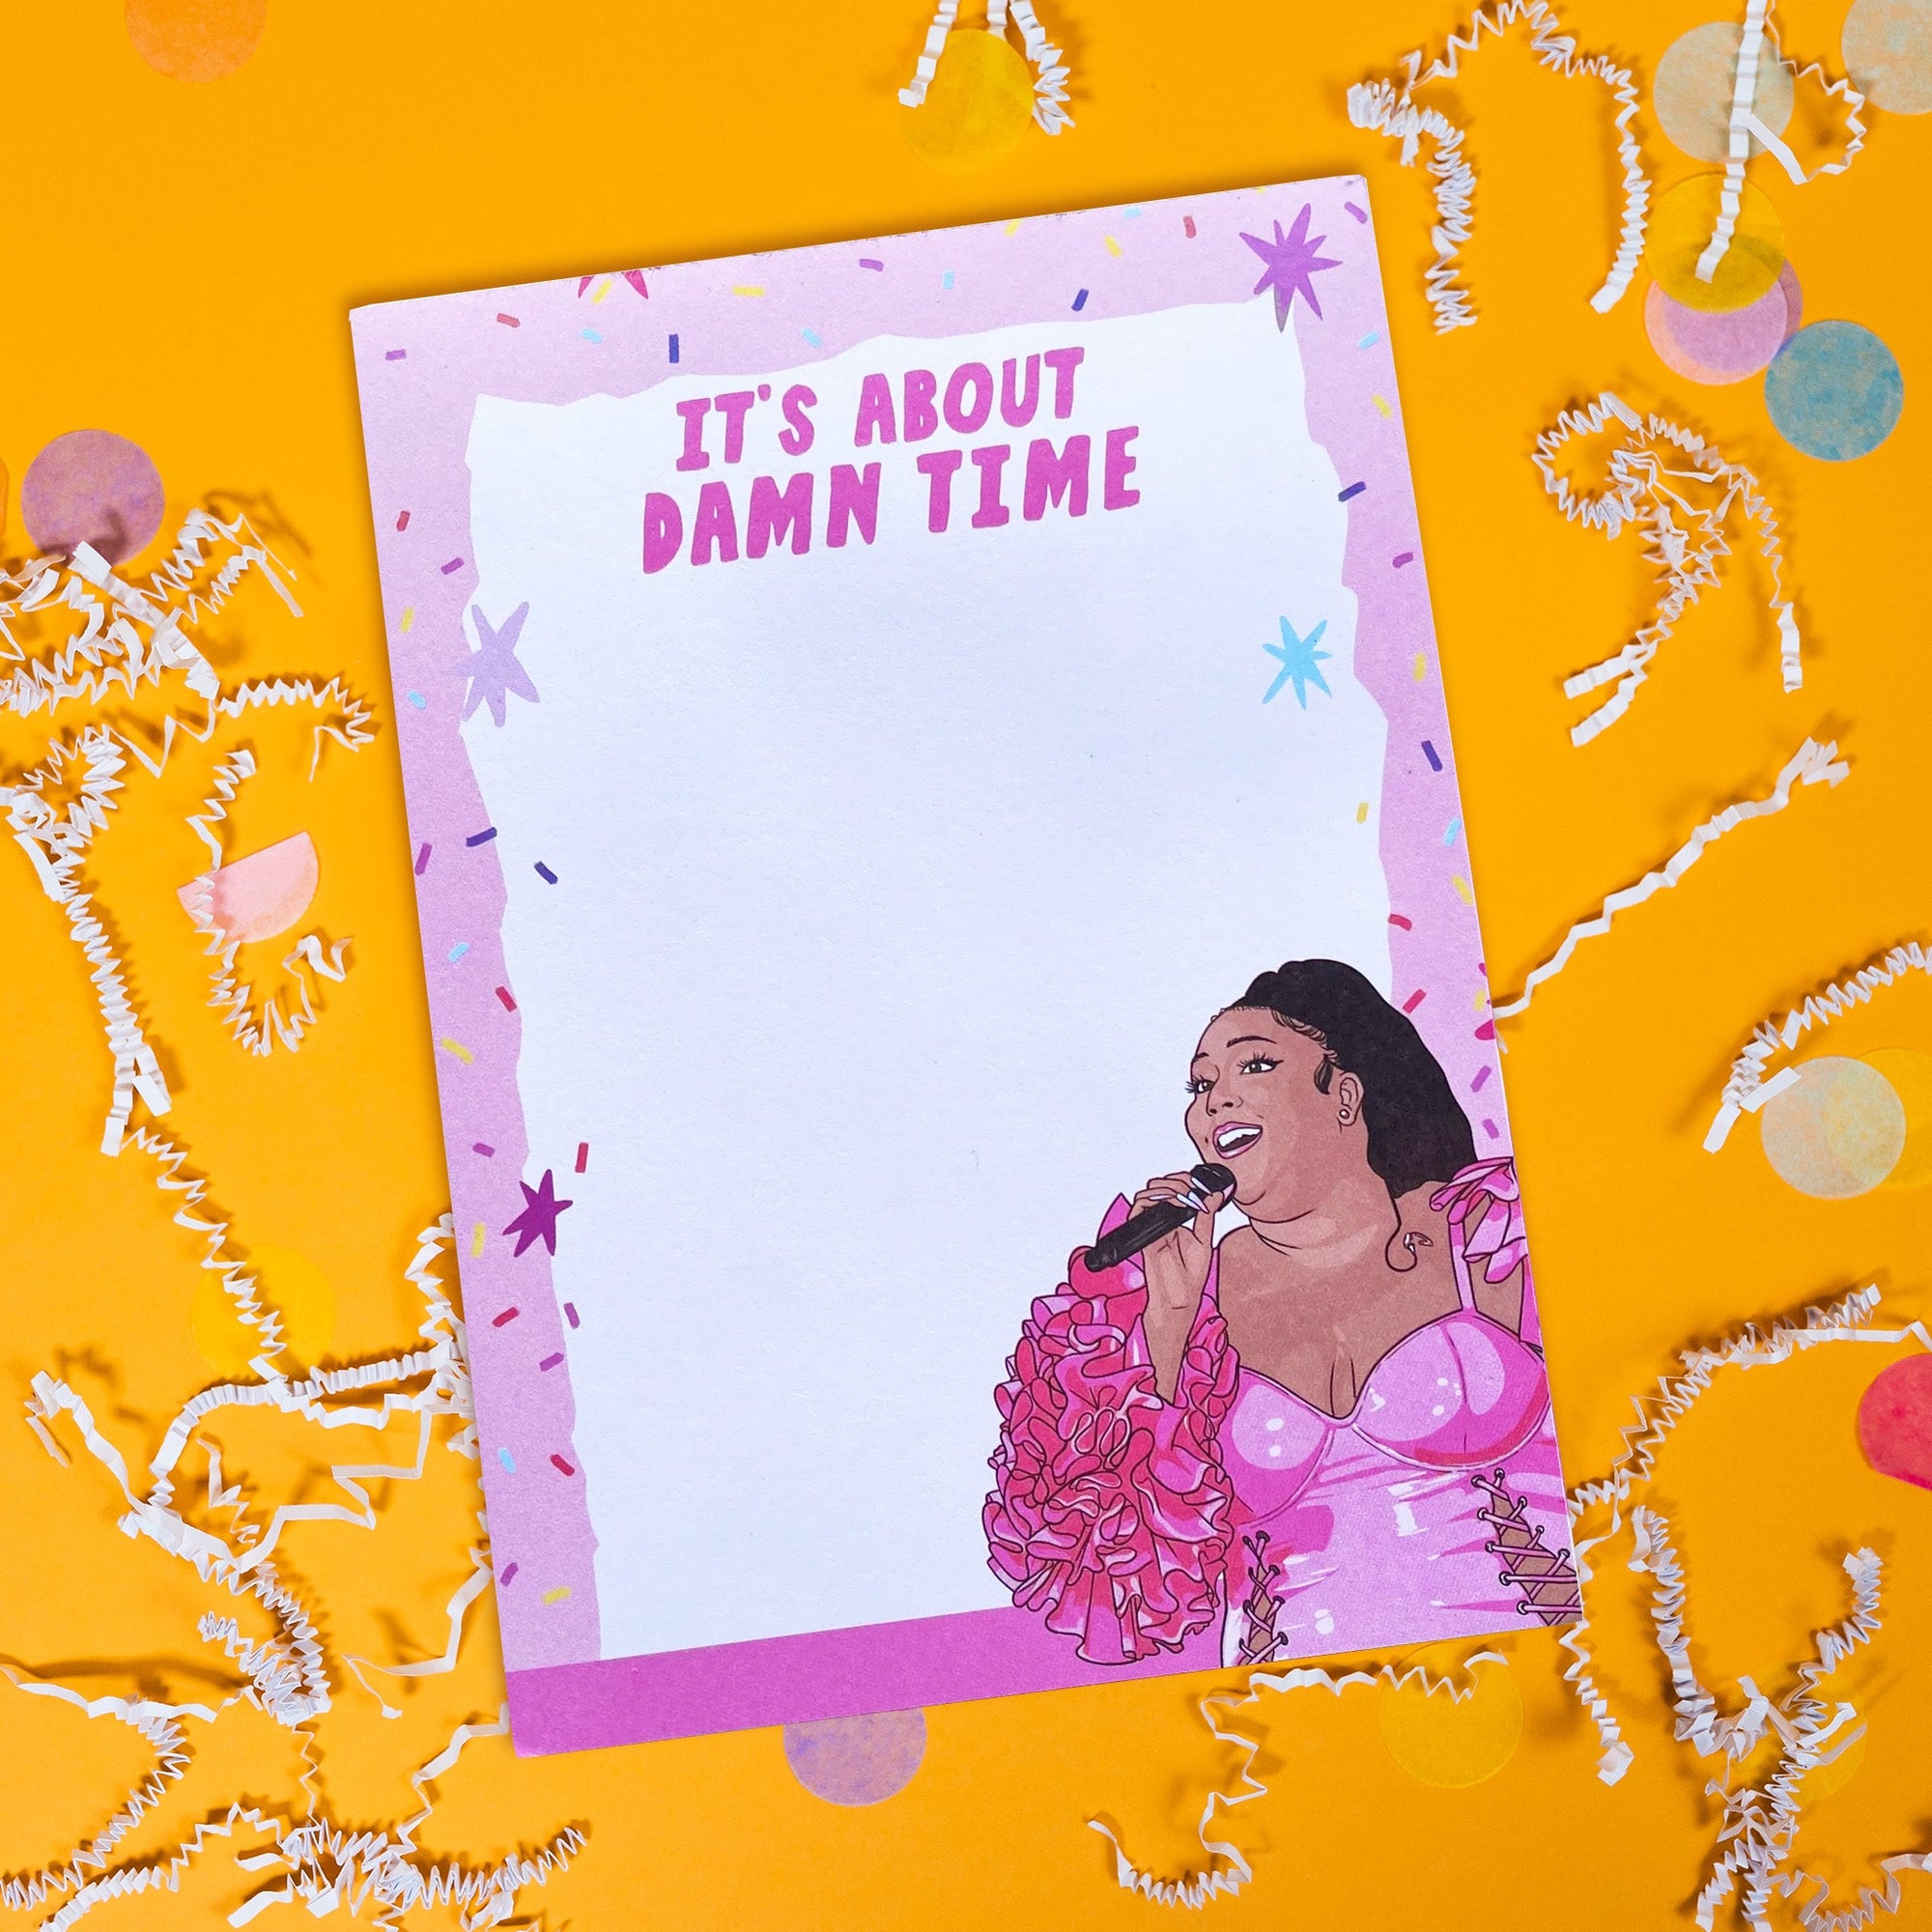 On a sunny mustard background sits a notepad with white crinkle and big, colorful confetti scattered around.. This Lizzo inspired notepard is colorful with different shades of pinks. There is a light pink border with colorful confetti and stars and a white, handdrawn box on top. At the top it says "IT'S ABOUT DAMN TIME" in hot pink, handwritten lettering. At the bottom right corner is an illustration of Lizzo with a hot pink outfit on and a microphone in her hand.